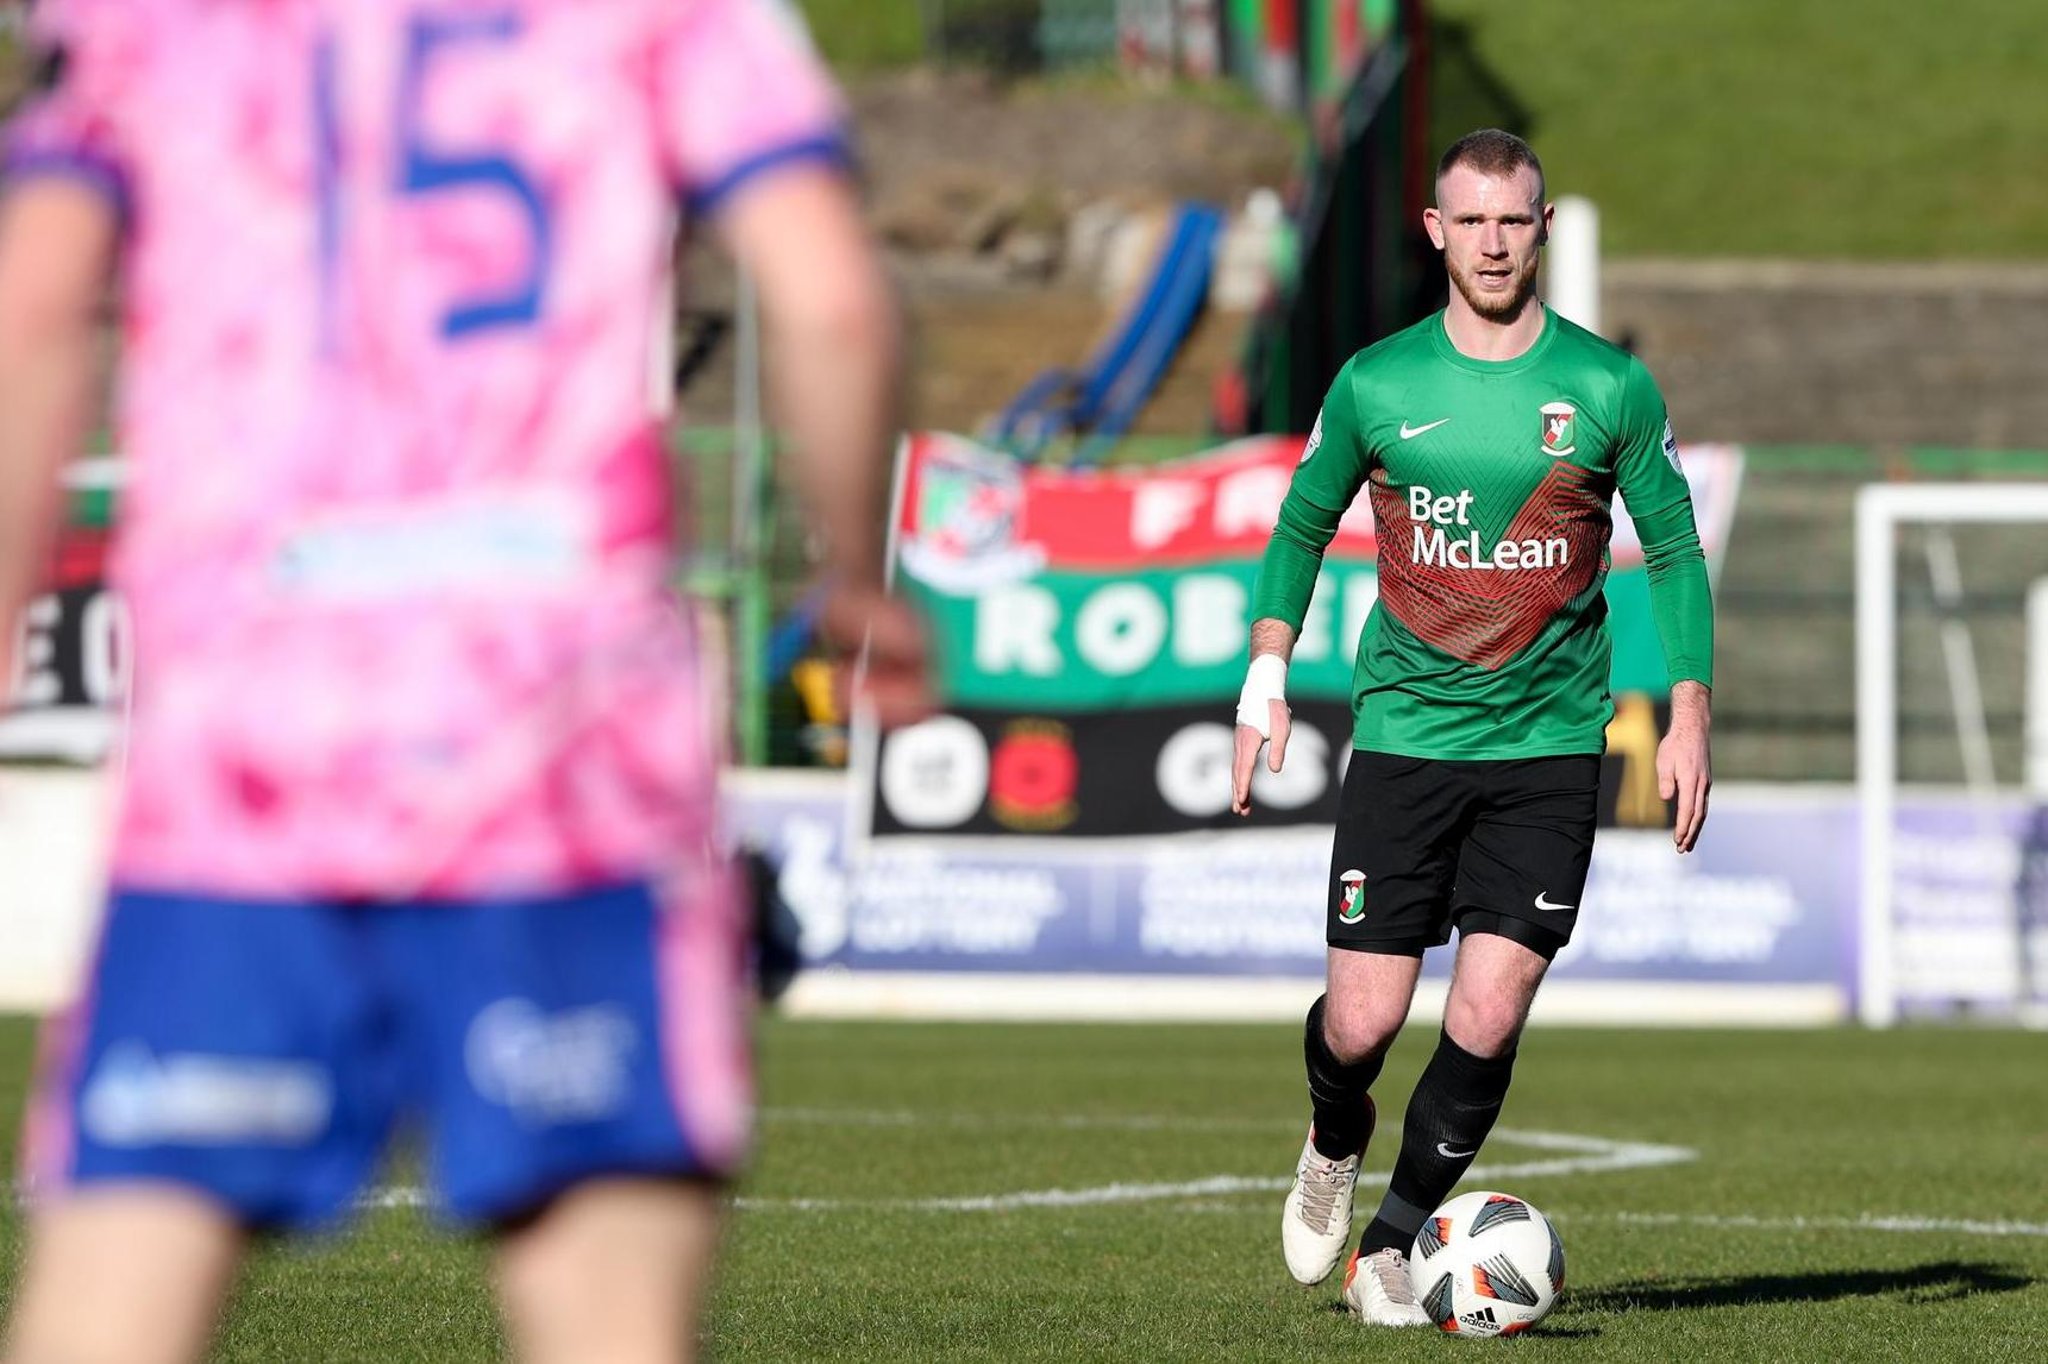 Glentoran highlight 'further judicial avenues remain open' in response to IFA